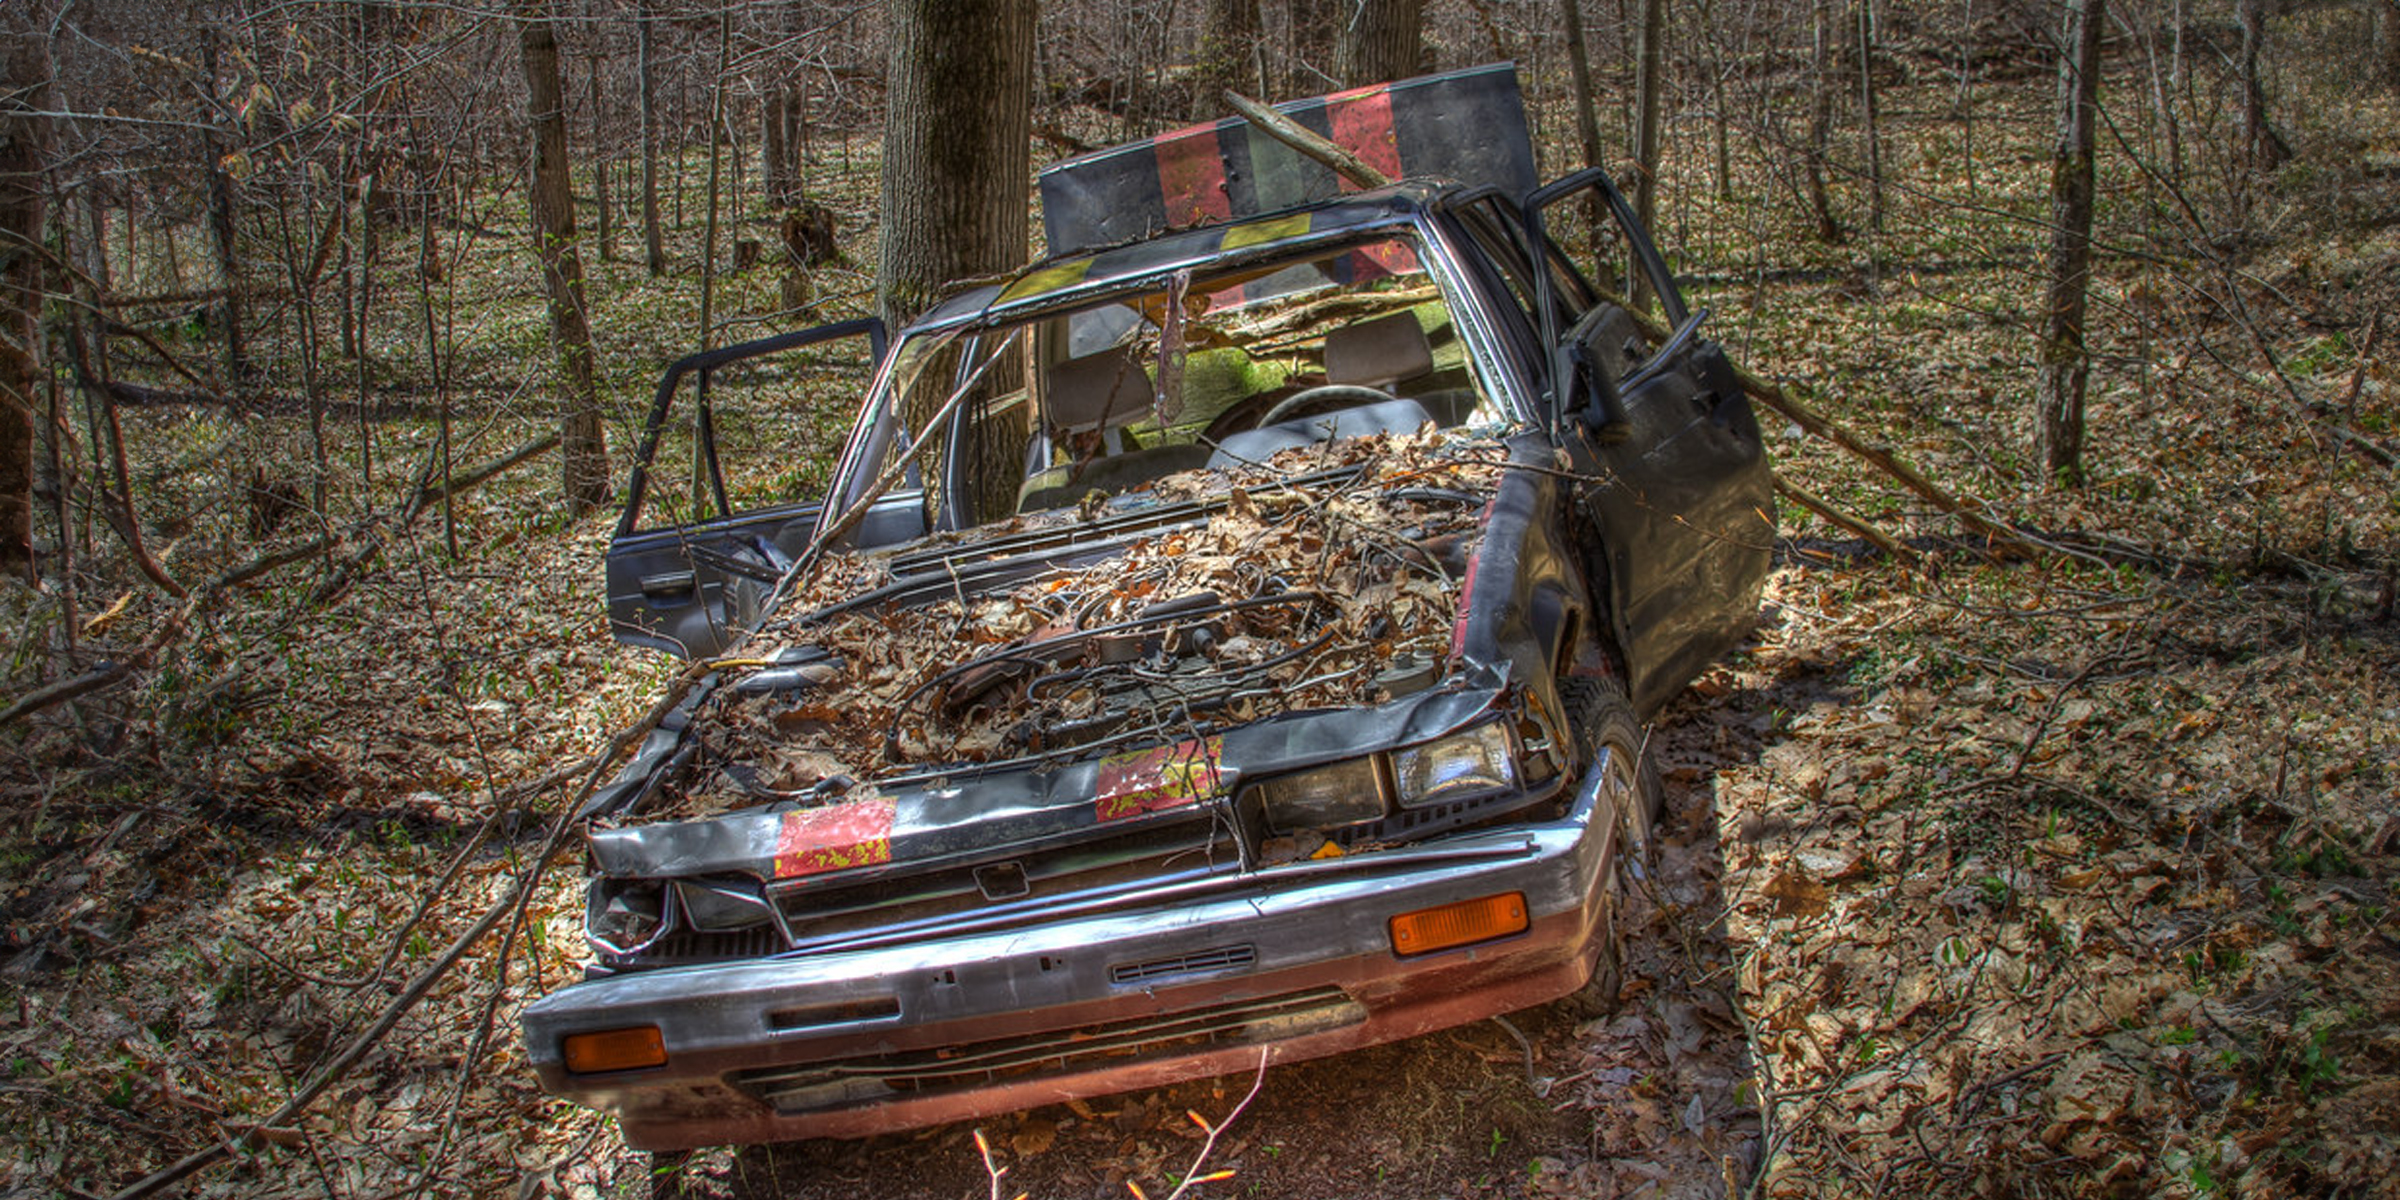 An abandoned car in a forest | Source: flickr.com/waitscm/CC BY 2.0